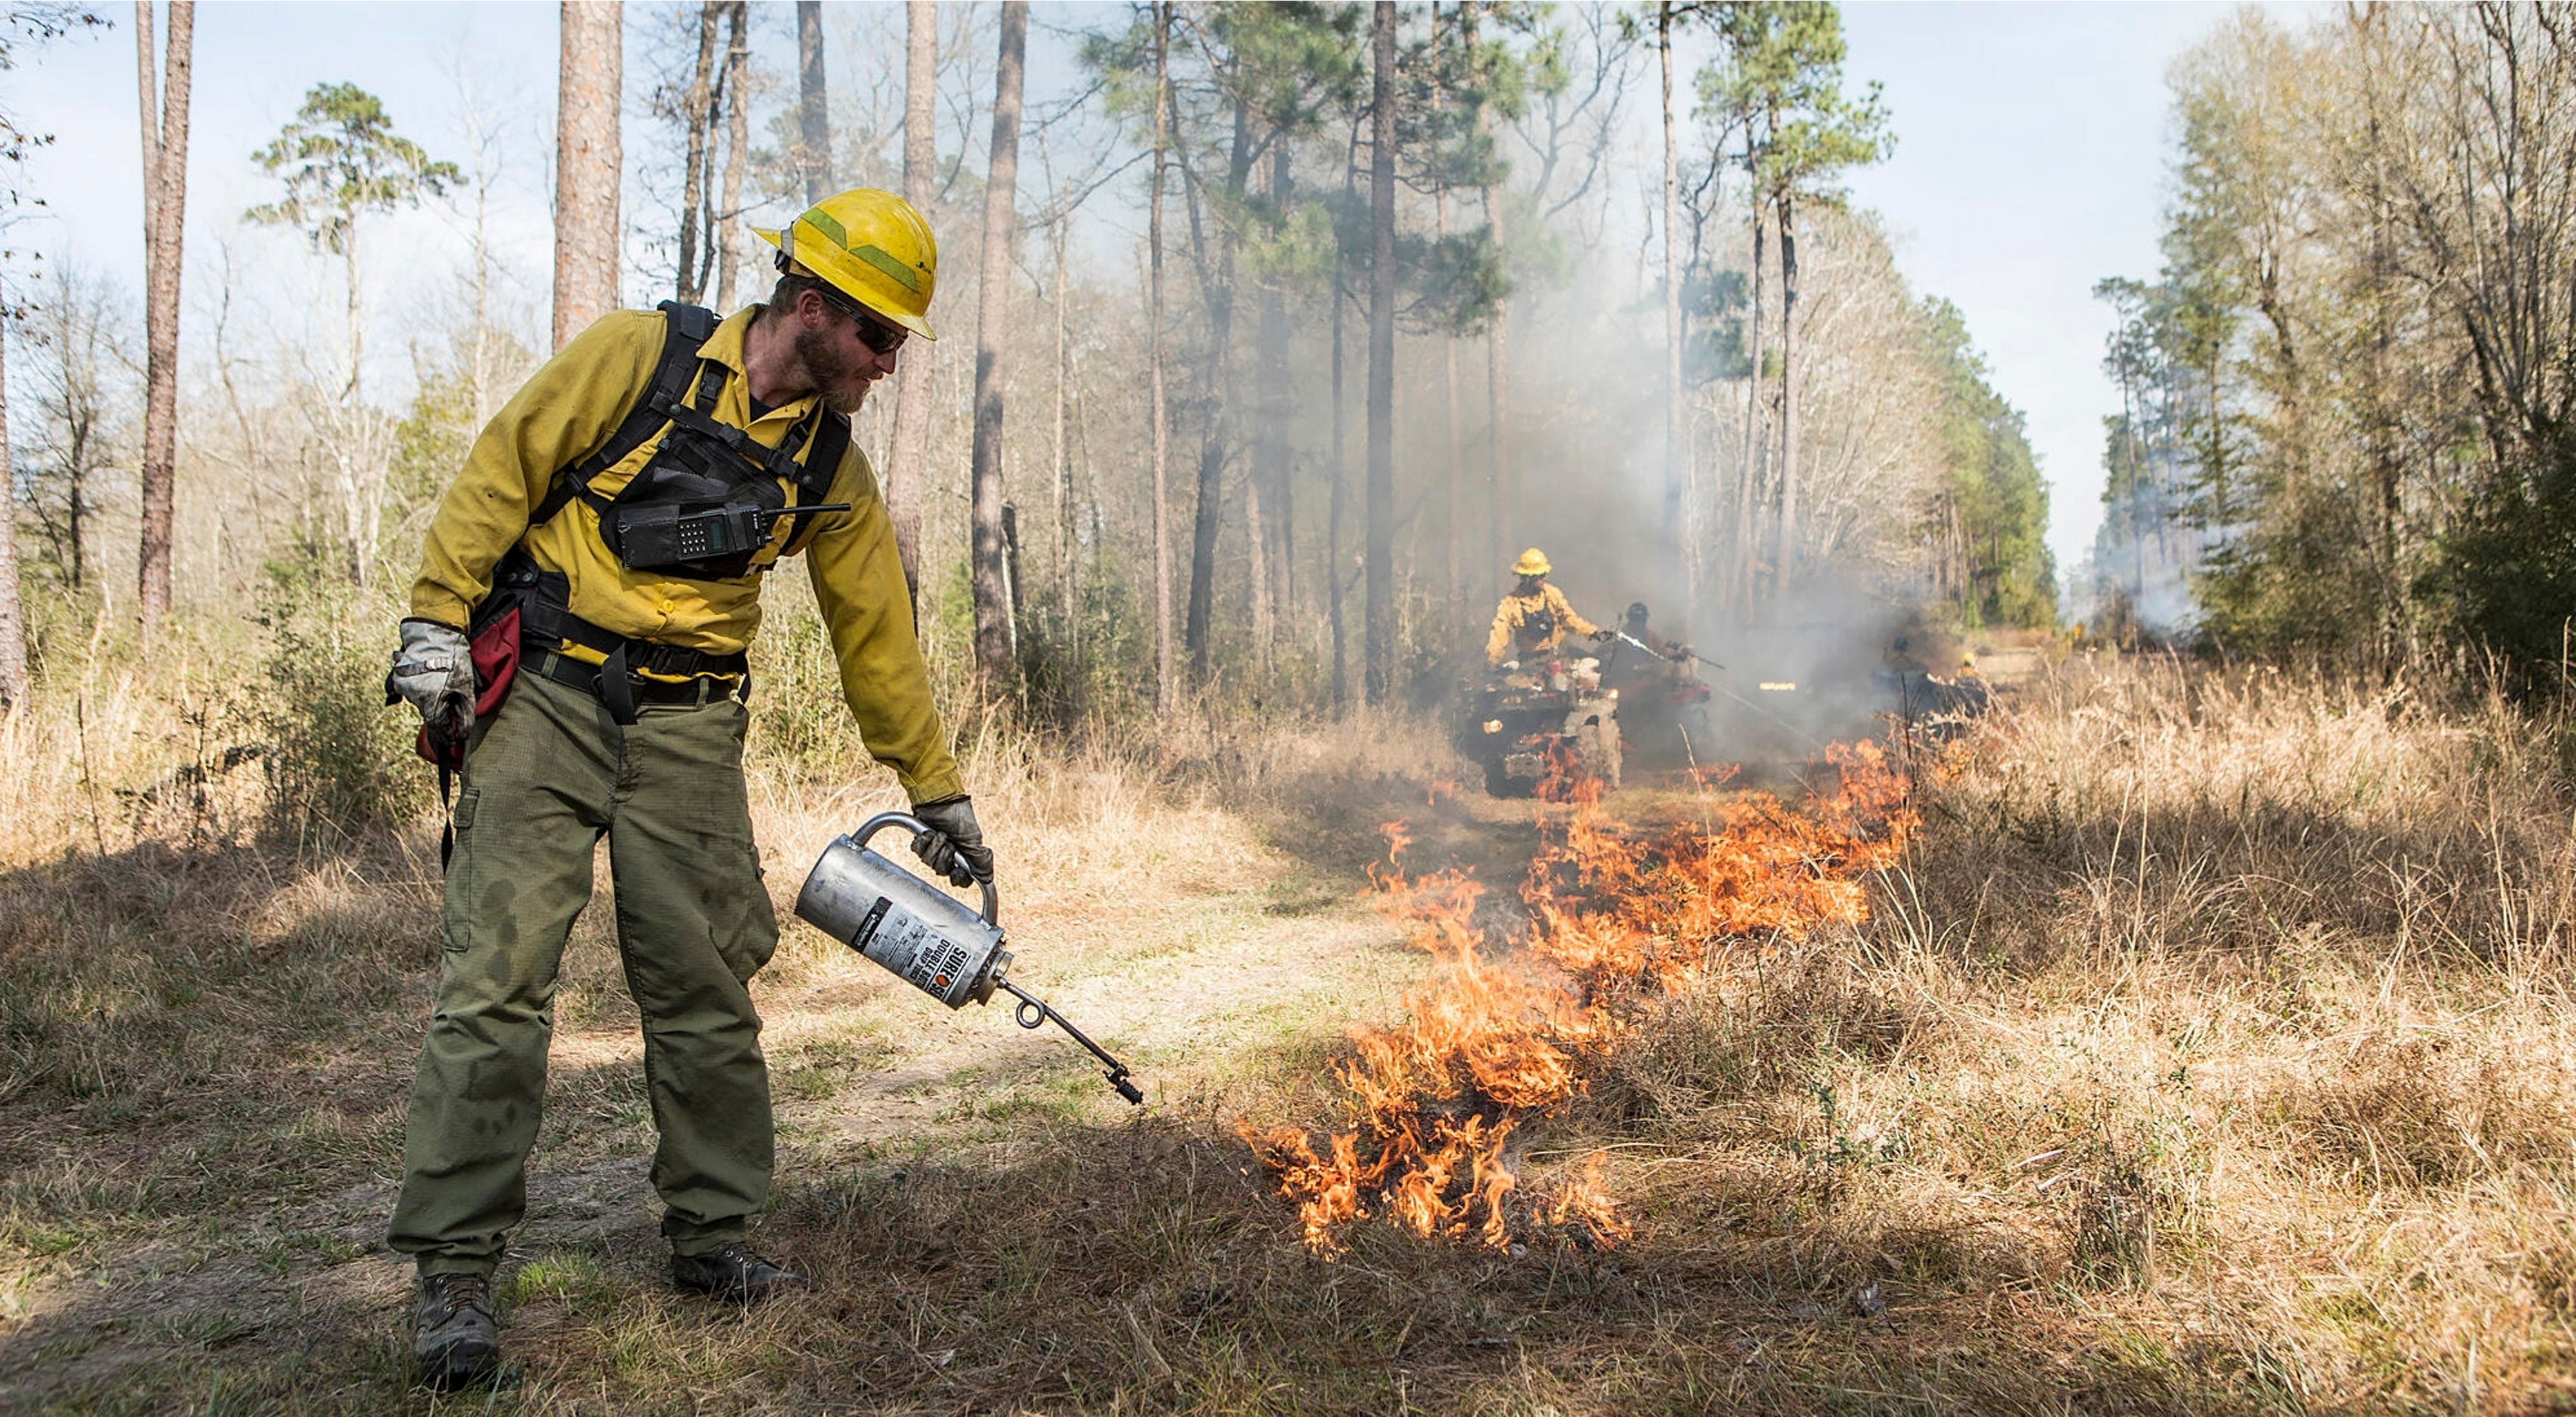 A TNC Texas fire crew member ignites a prescribed burn to consume plant fuels on the forest floor using a drip torch, while two fire practitioners sit on ATV's in the background.